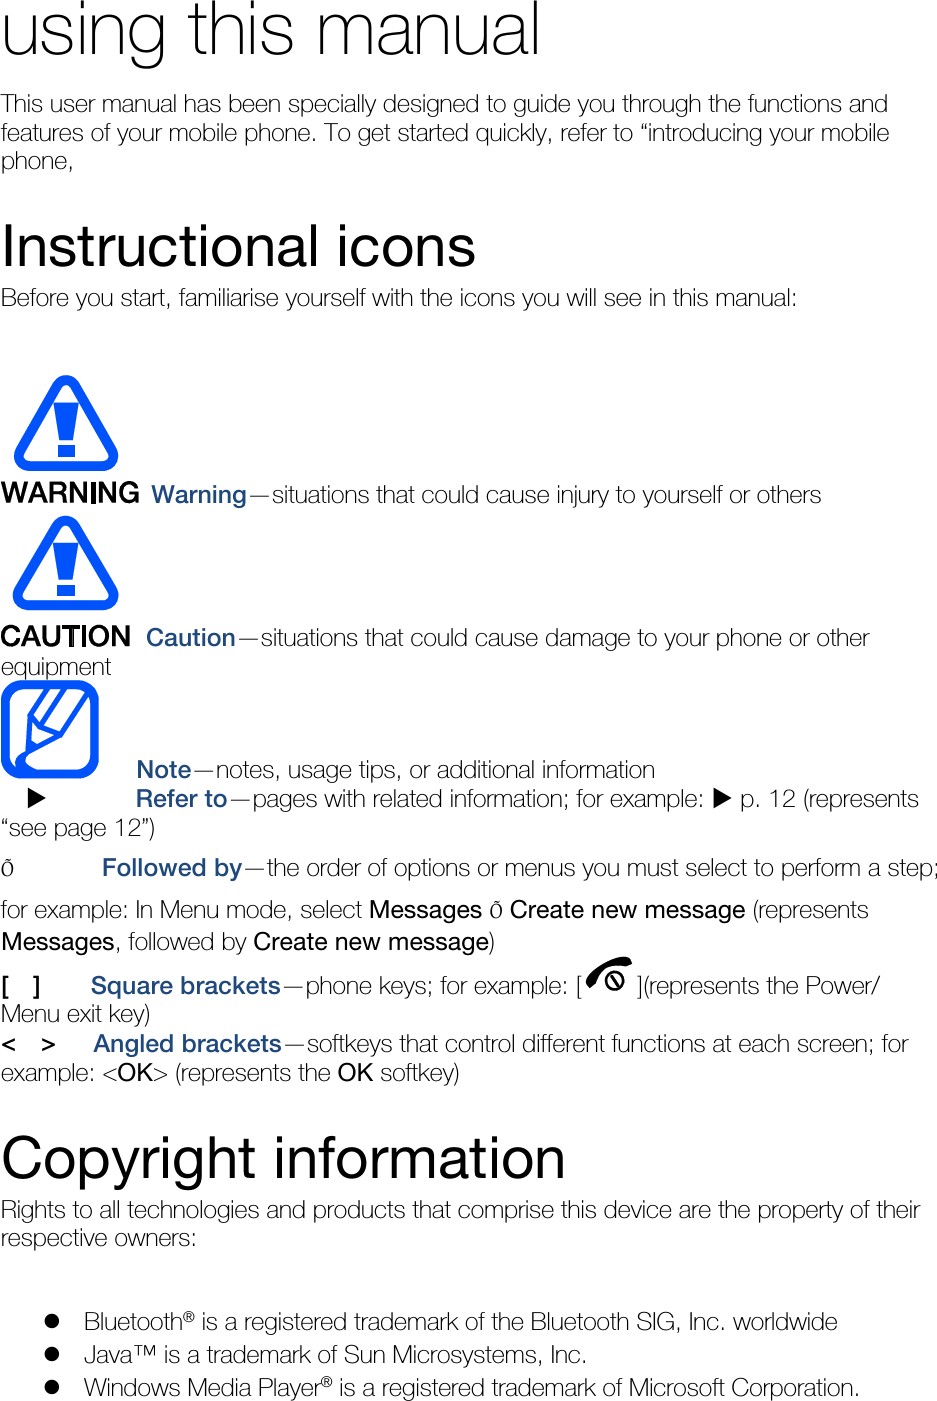 using this manual This user manual has been specially designed to guide you through the functions and features of your mobile phone. To get started quickly, refer to “introducing your mobile phone,  Instructional icons Before you start, familiarise yourself with the icons you will see in this manual:     Warning—situations that could cause injury to yourself or others  Caution—situations that could cause damage to your phone or other equipment    Note—notes, usage tips, or additional information          Refer to—pages with related information; for example:  p. 12 (represents “see page 12”) Õ       Followed by—the order of options or menus you must select to perform a step; for example: In Menu mode, select Messages Õ Create new message (represents Messages, followed by Create new message) [  ]    Square brackets—phone keys; for example: [ ](represents the Power/ Menu exit key) &lt;  &gt;   Angled brackets—softkeys that control different functions at each screen; for example: &lt;OK&gt; (represents the OK softkey)  Copyright information Rights to all technologies and products that comprise this device are the property of their respective owners:   Bluetooth® is a registered trademark of the Bluetooth SIG, Inc. worldwide  Java™ is a trademark of Sun Microsystems, Inc.  Windows Media Player® is a registered trademark of Microsoft Corporation. 